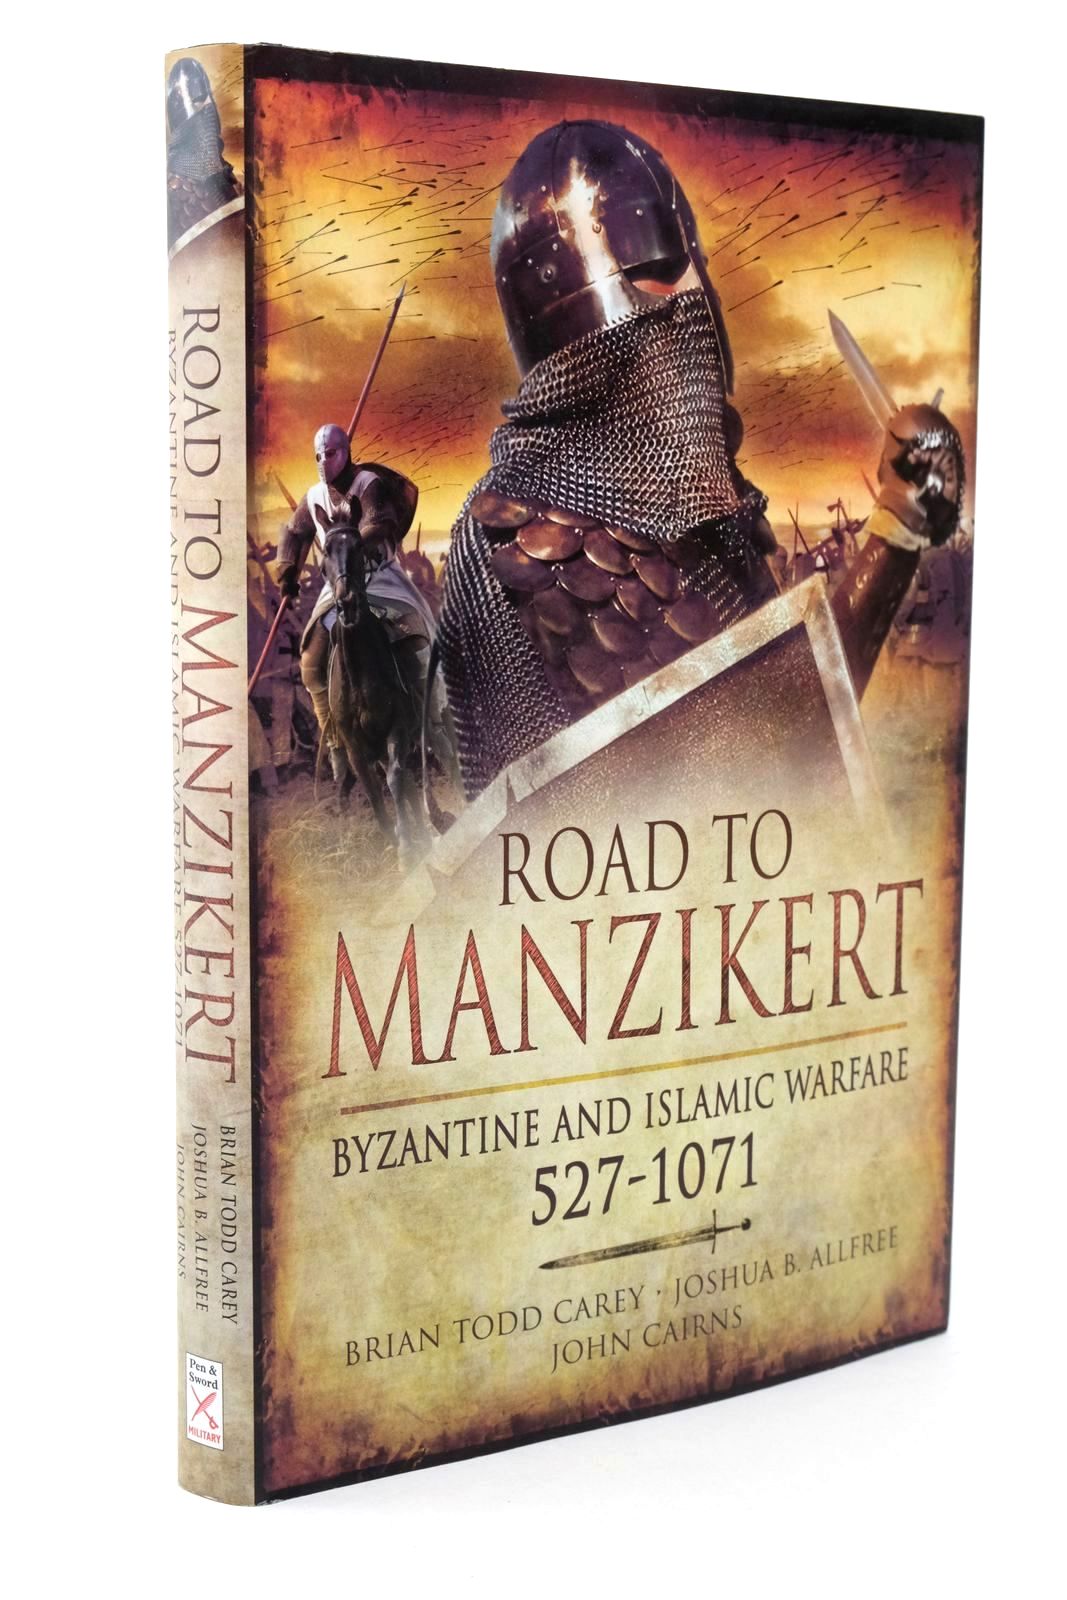 Photo of ROAD TO MANZIKERT: BYZANTIME AND ISLAMIC WARFARE, 527-1071 written by Carey, Brian Todd illustrated by Allfree, Joshua B. Cairns, John published by Pen &amp; Sword (STOCK CODE: 1322623)  for sale by Stella & Rose's Books